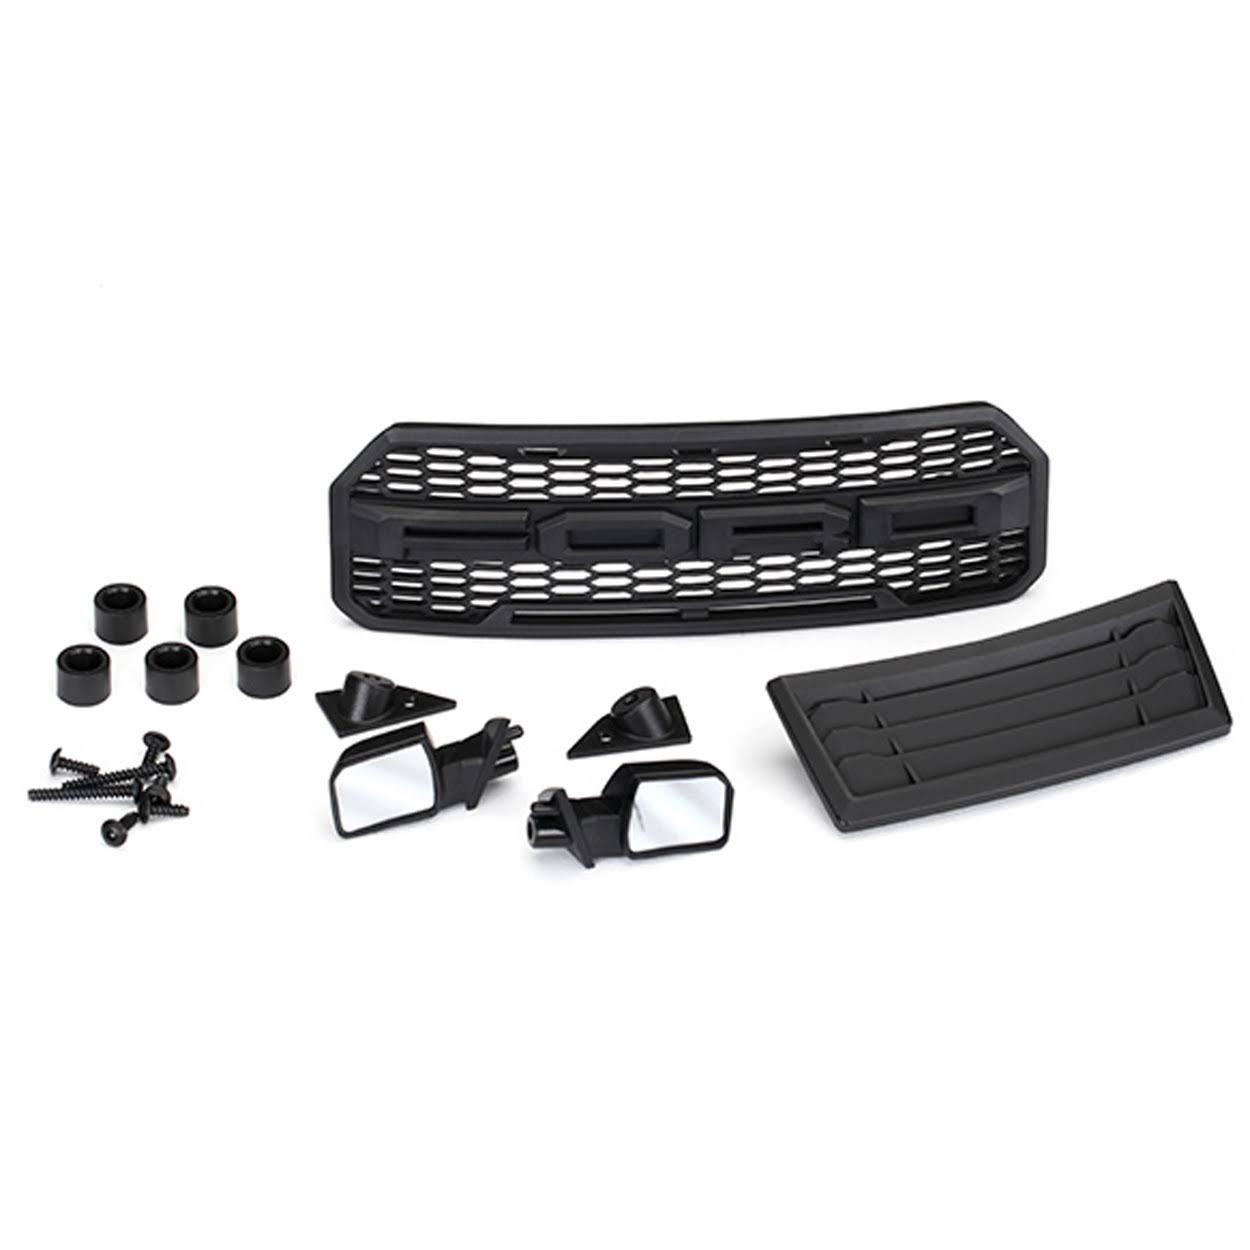 Traxxas Tra5828 2017 Ford Raptor Body Accessories Kit